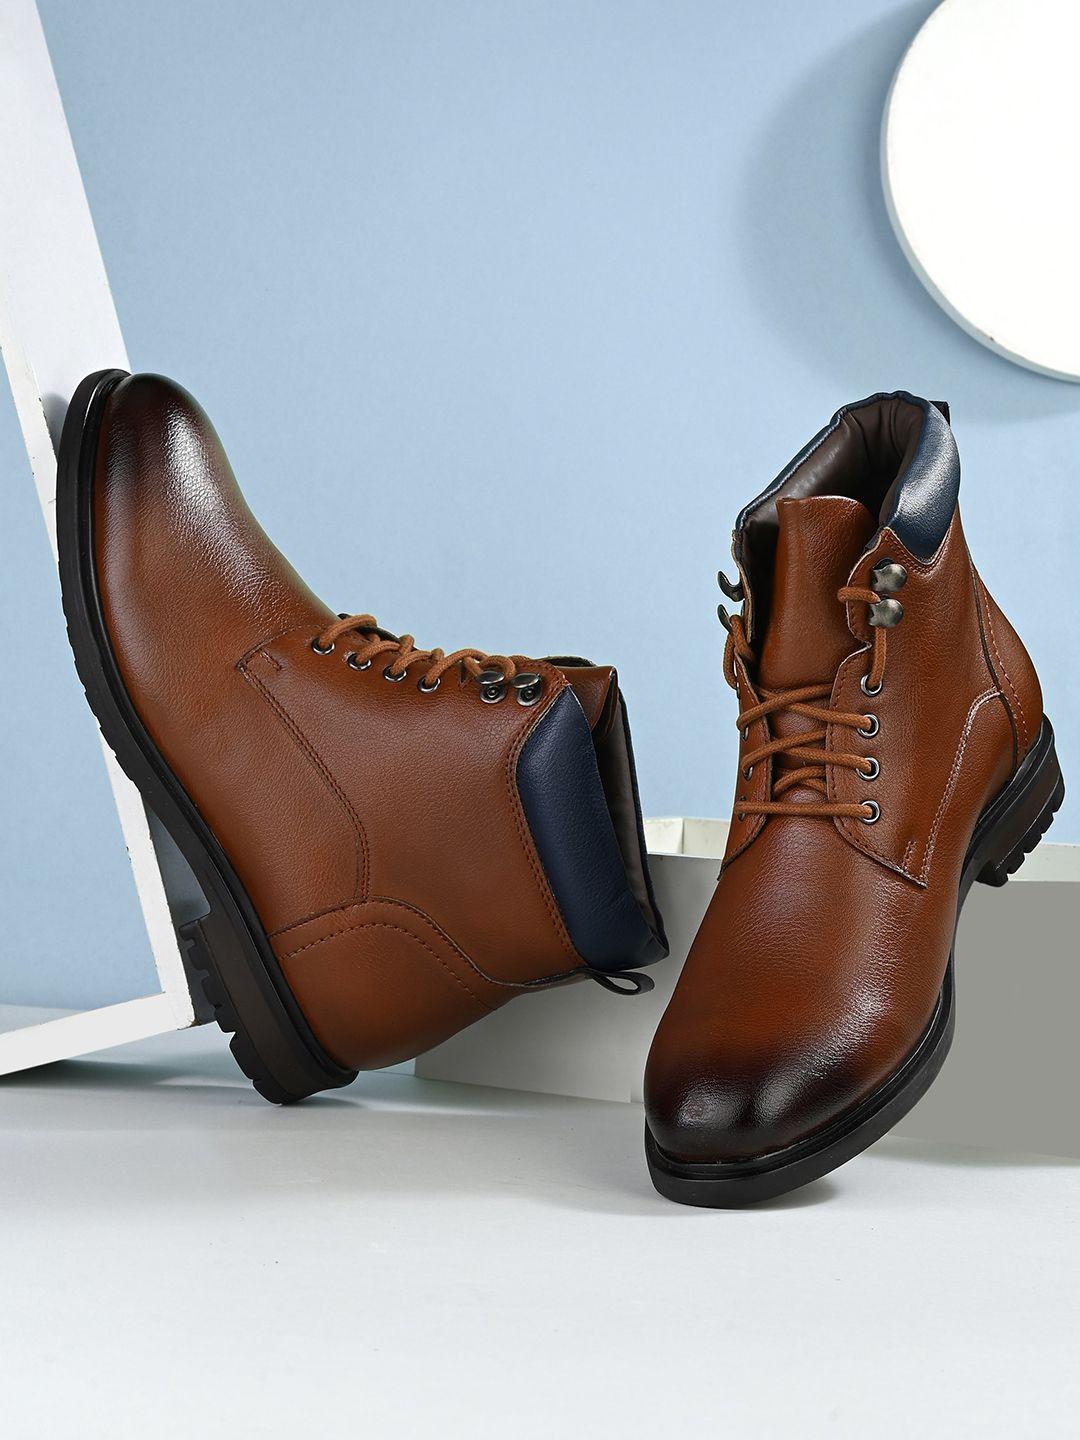 the roadster lifestyle co. men textured high-top regular boots